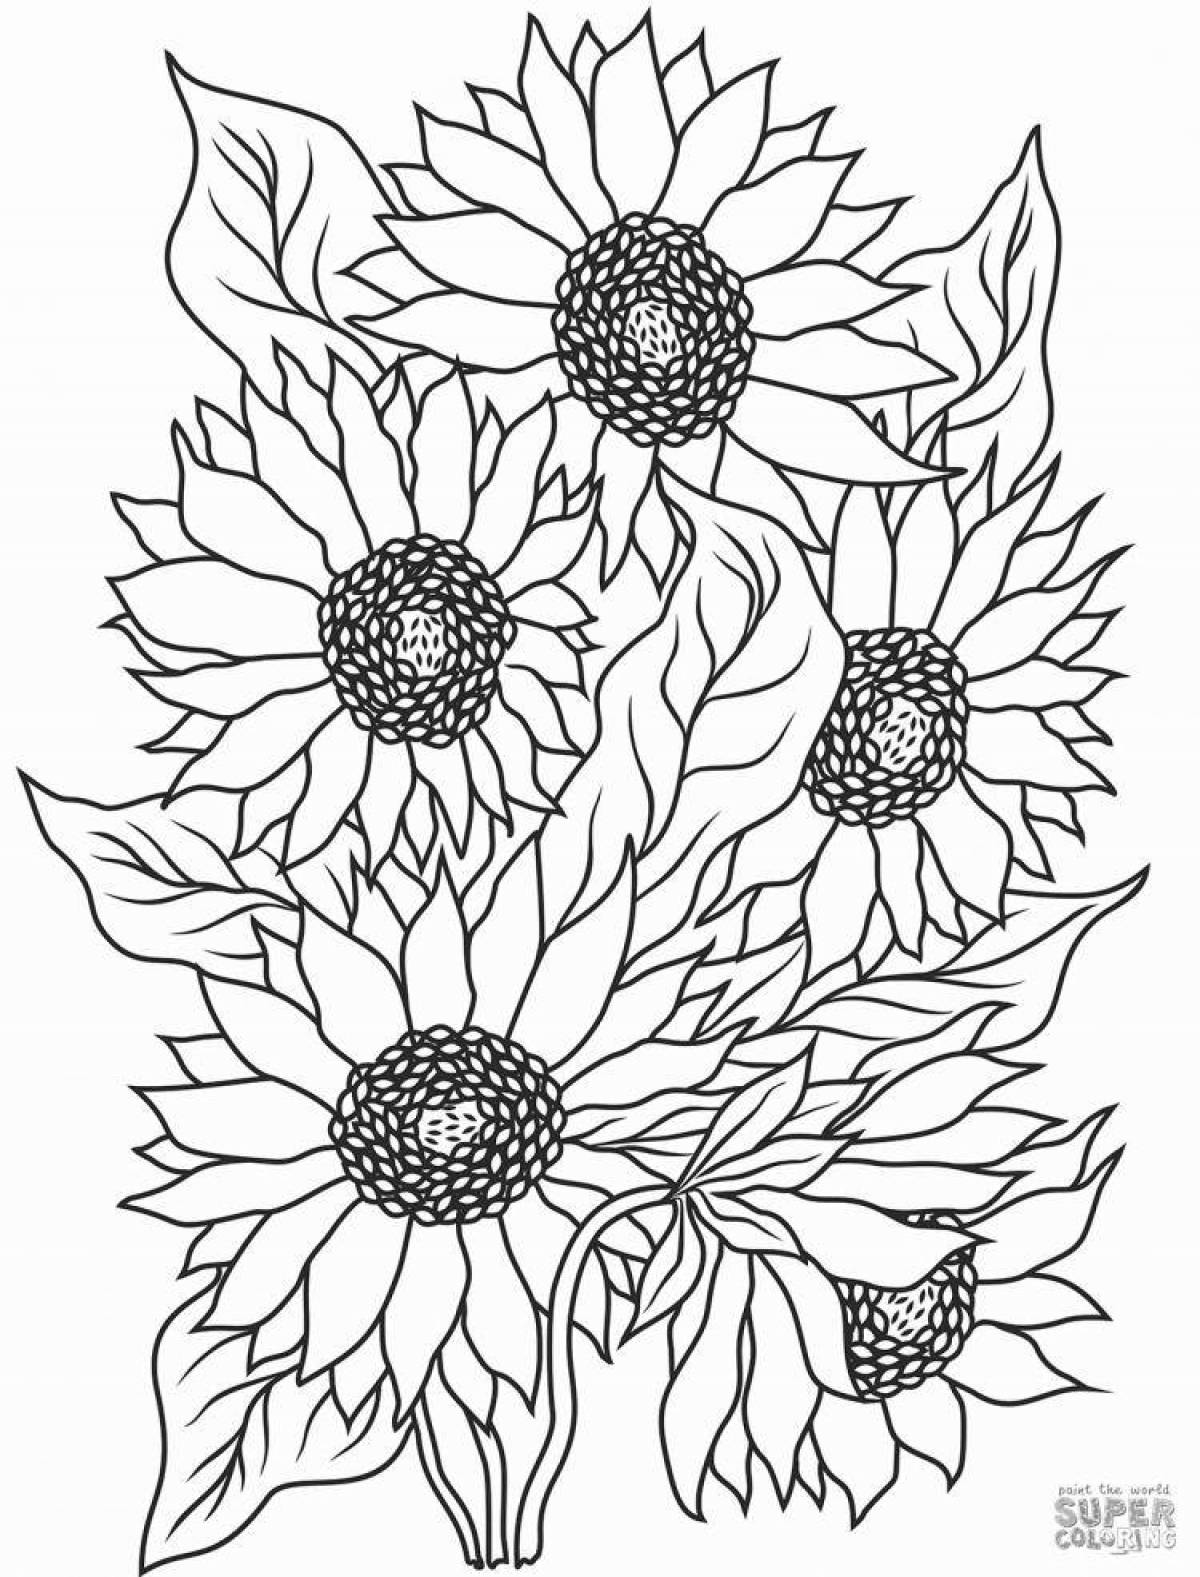 A wonderful sunflower coloring book for kids